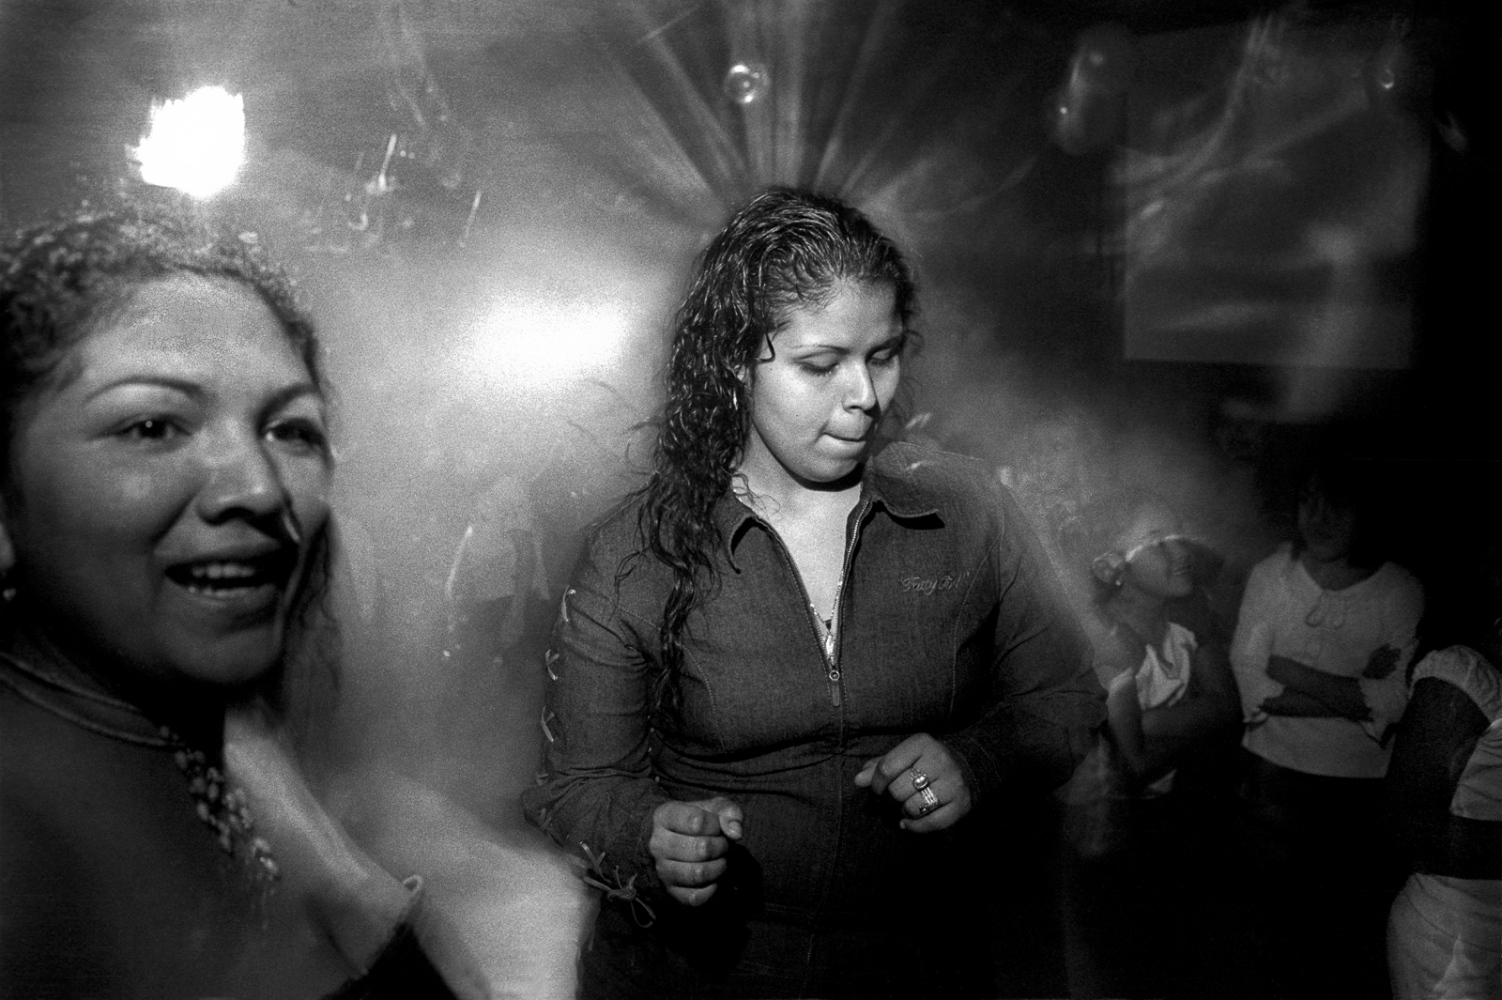 Coming of Age - Patty dances at her niece's birthday party.